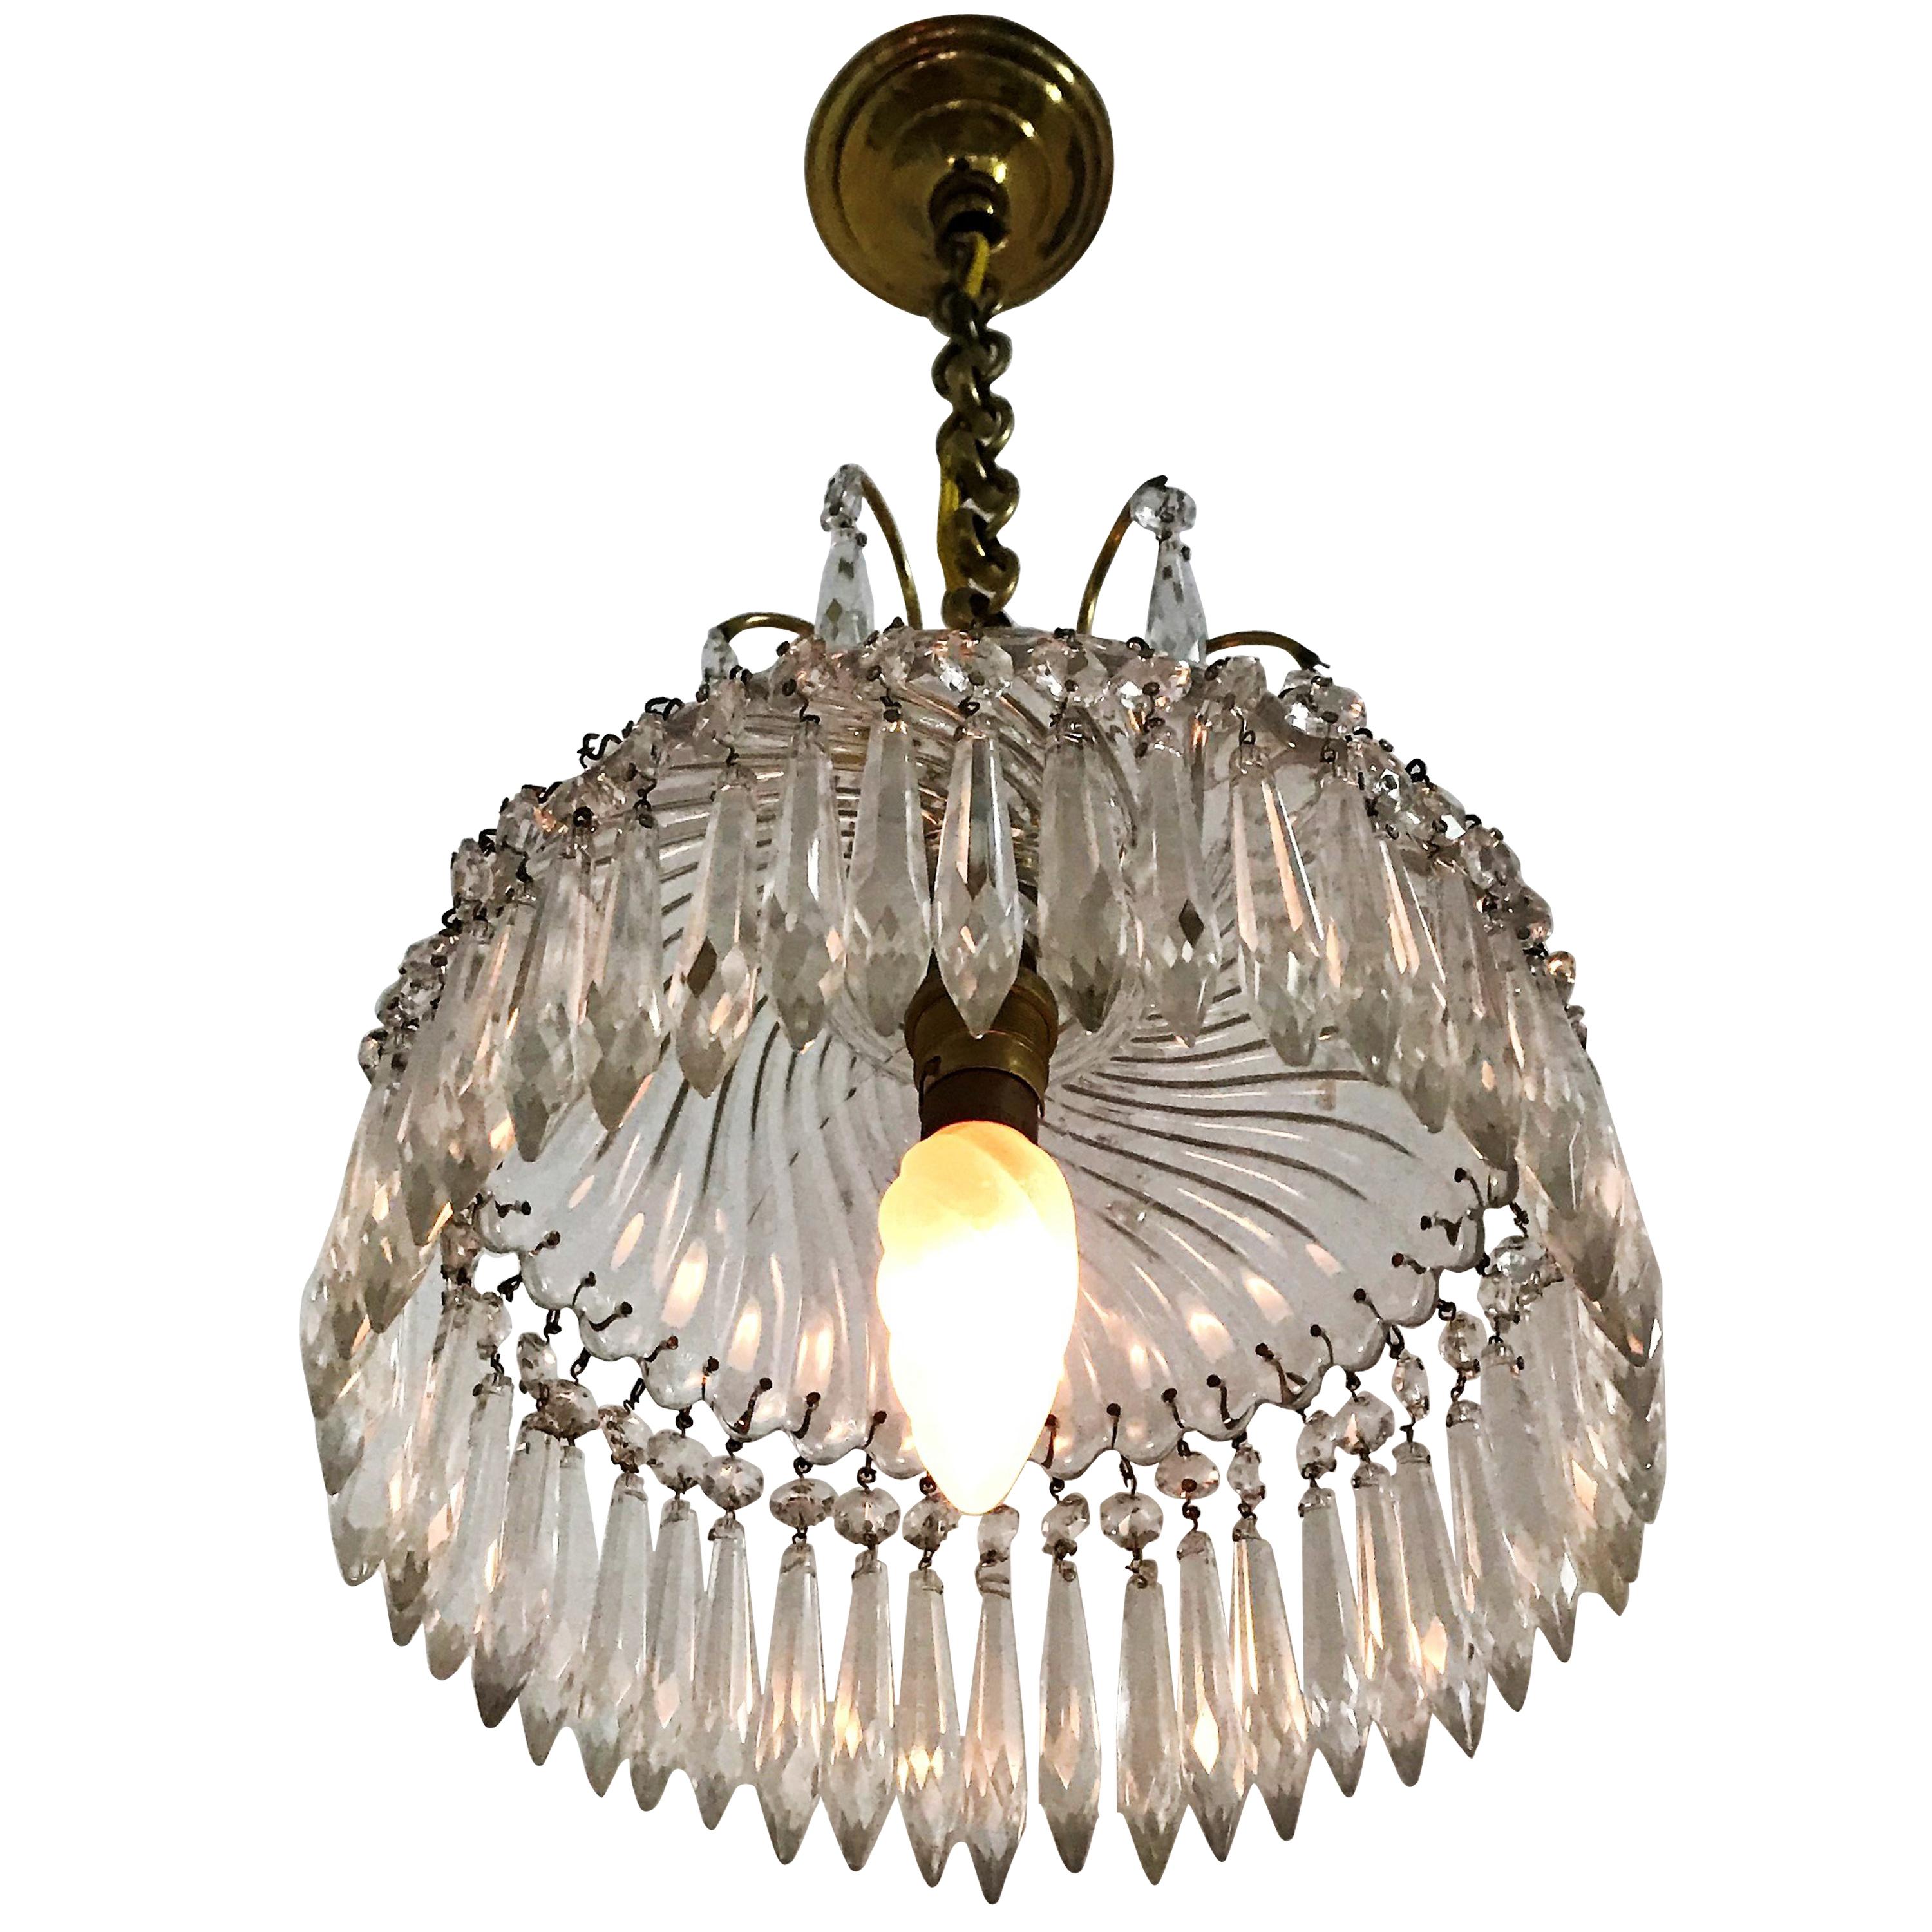 Baccarat Stamped, Crystal Lantern or Pendant Light, circa 1950, Made in France